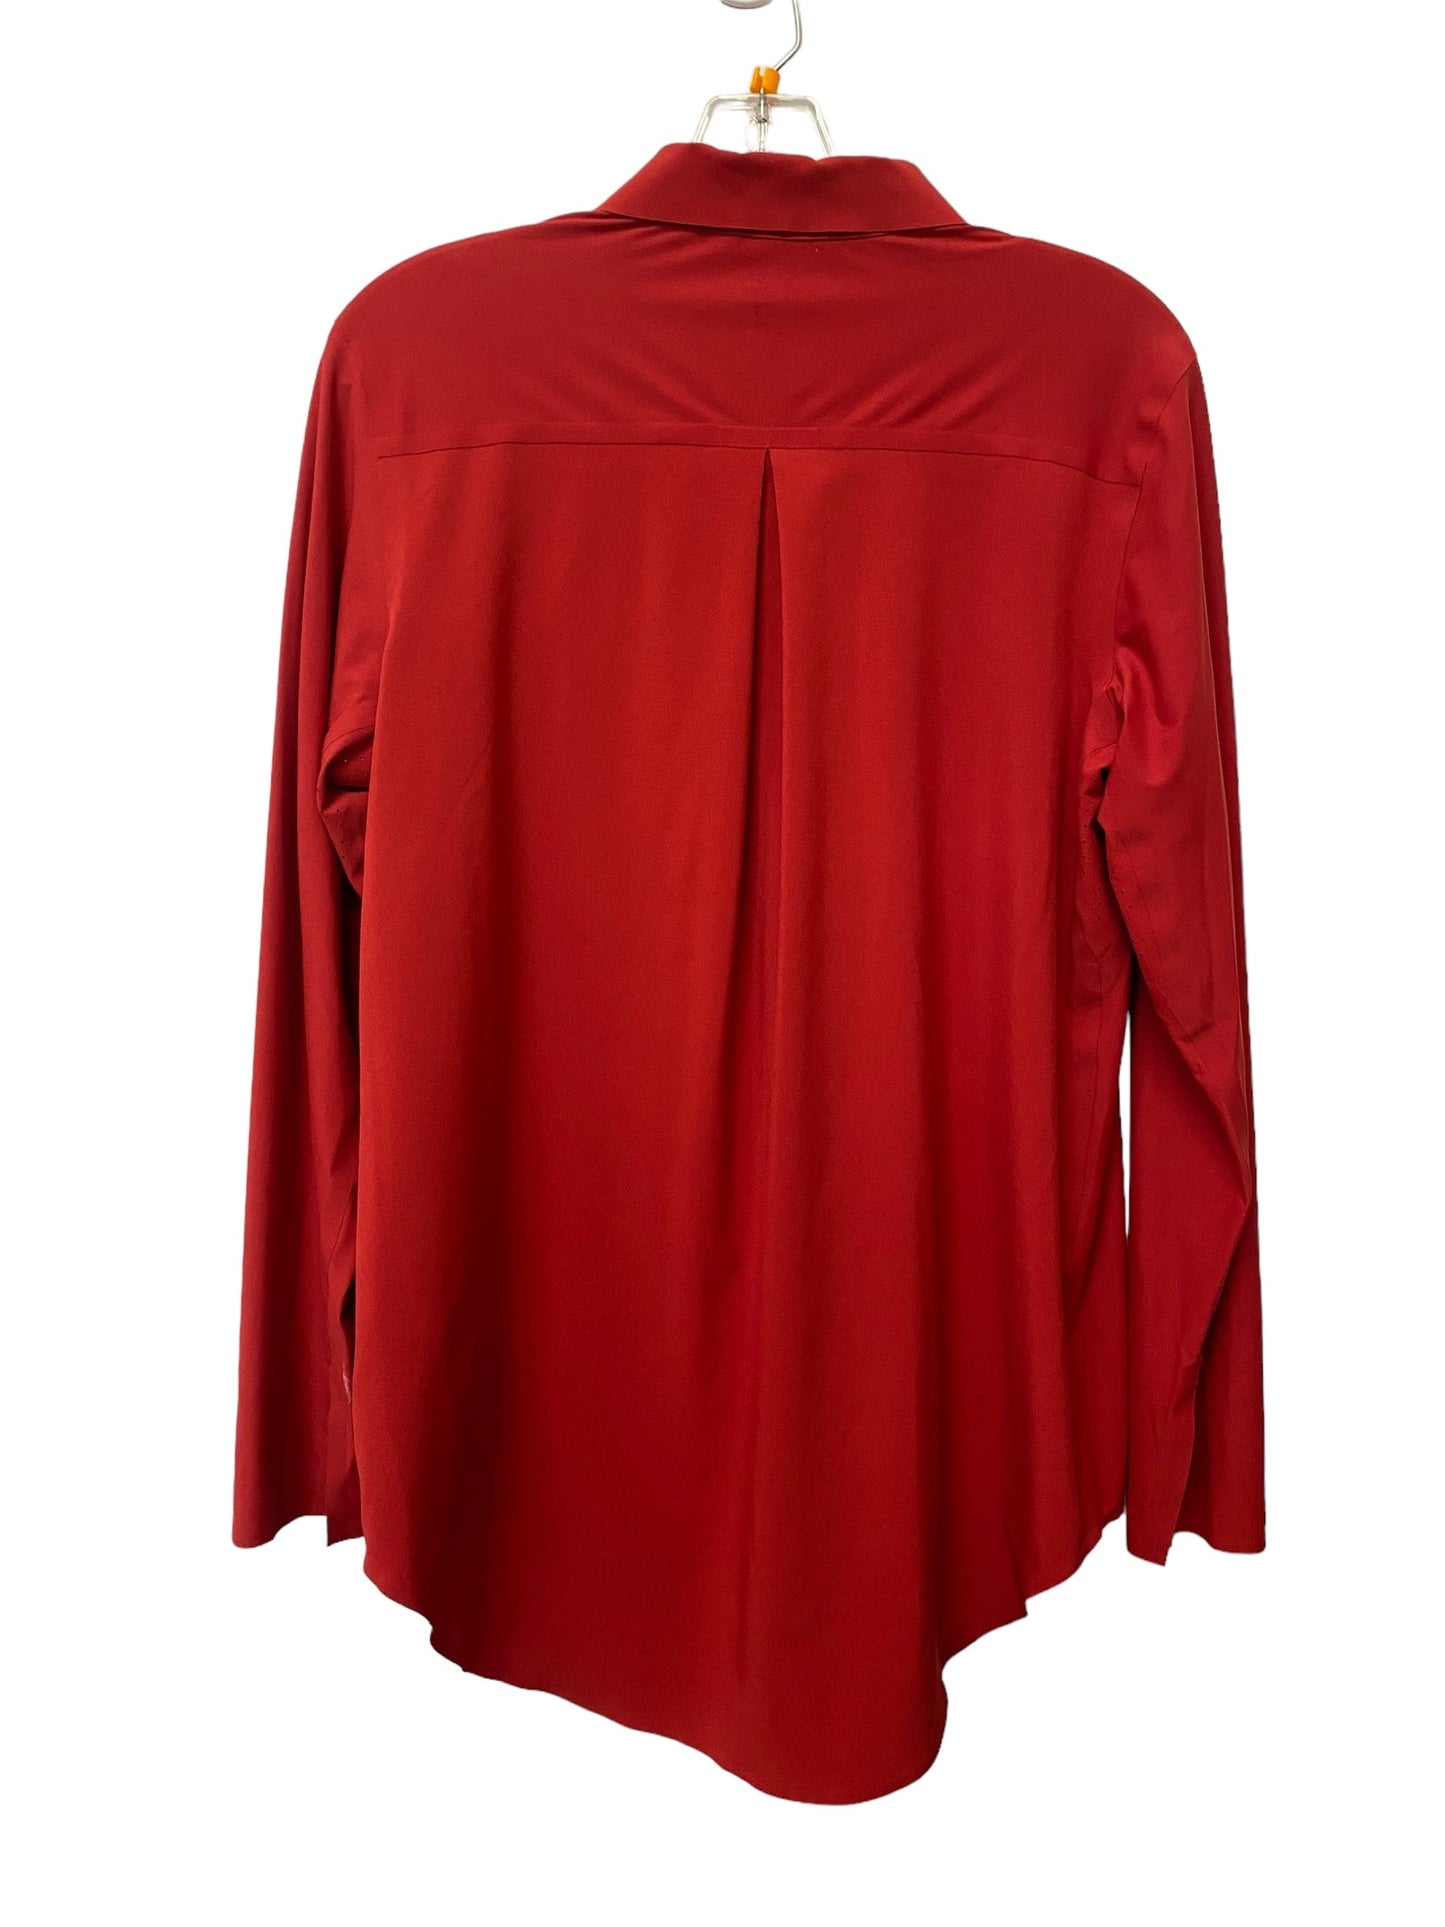 Red Athletic Top Long Sleeve Collar Athleta, Size S